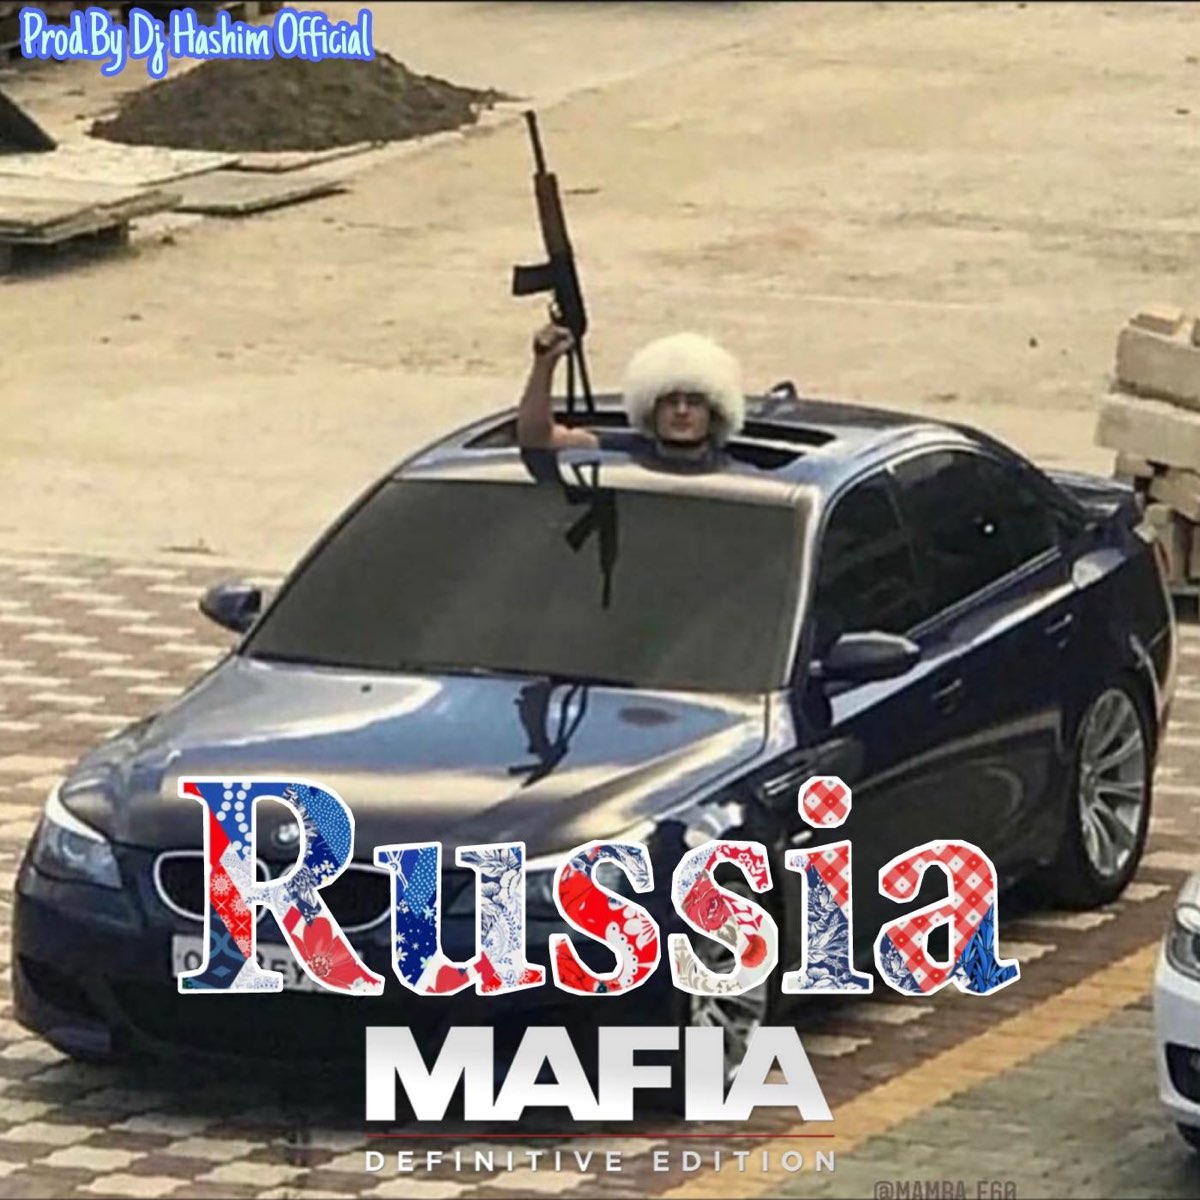 Russian Mafia Song (Original Mixed) - Single by DJ Hashim Official on Apple  Music